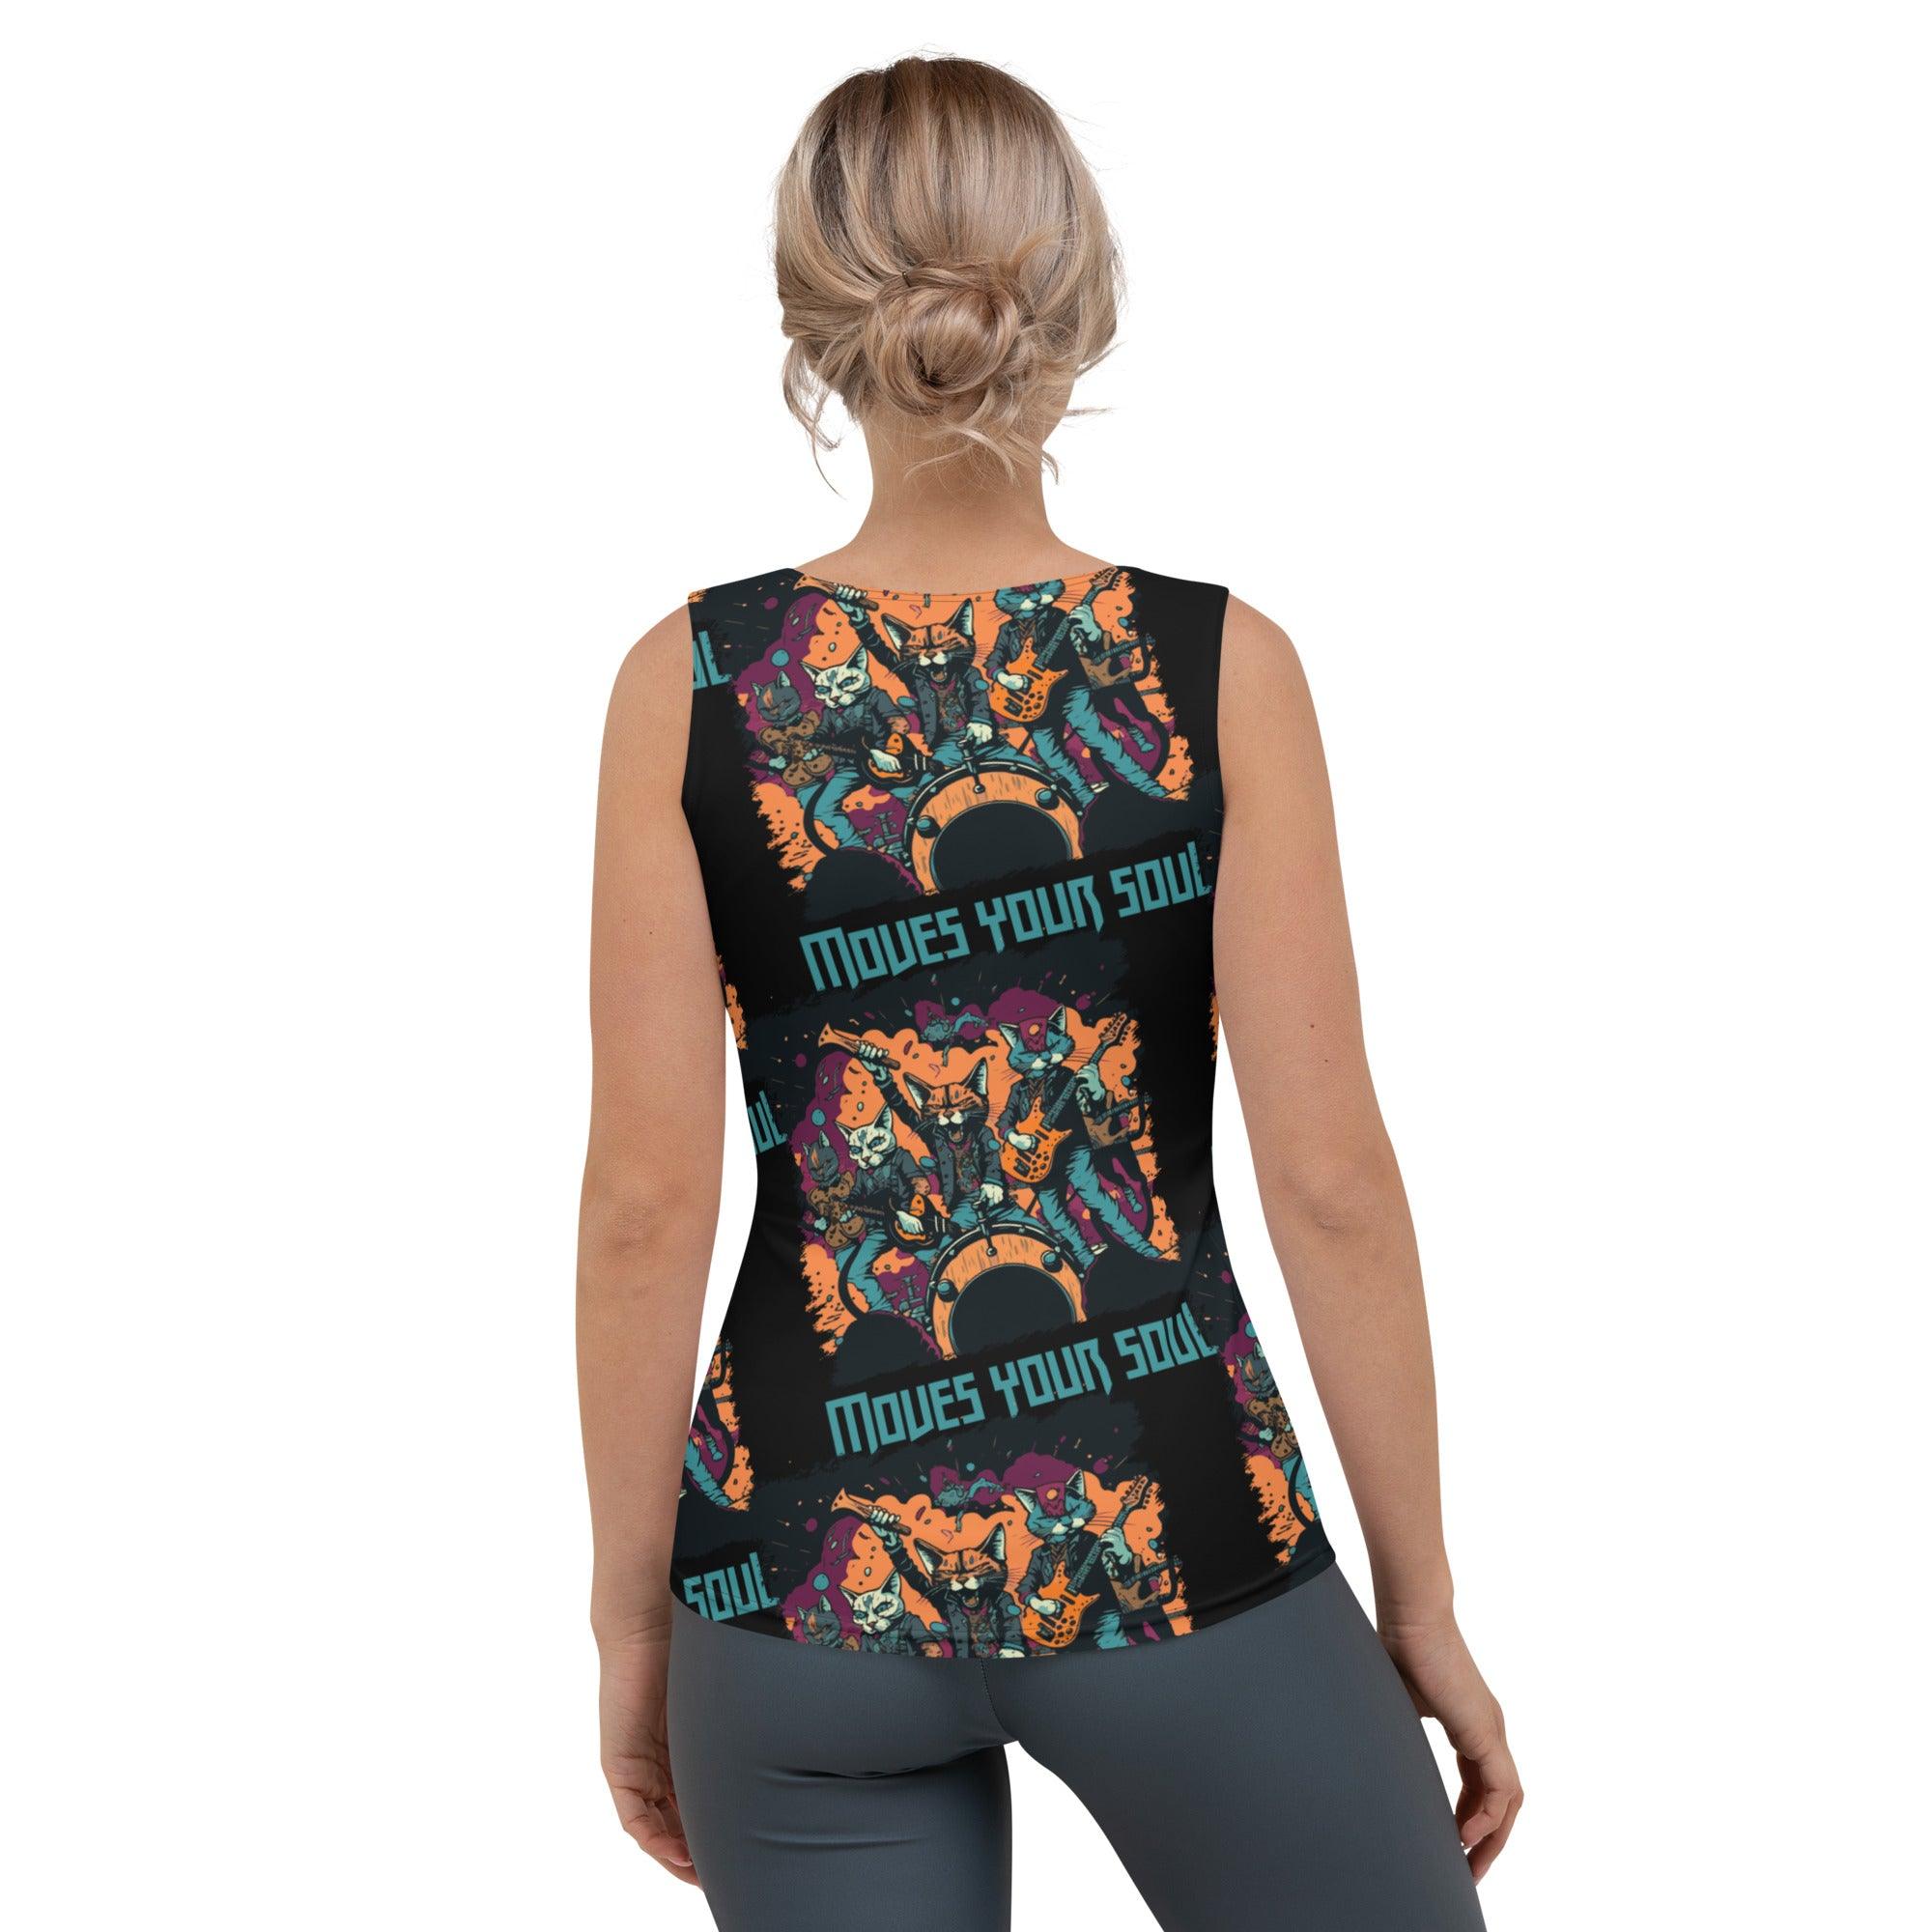 Moves Your Soul Sublimation Cut & Sew Tank Top - Beyond T-shirts